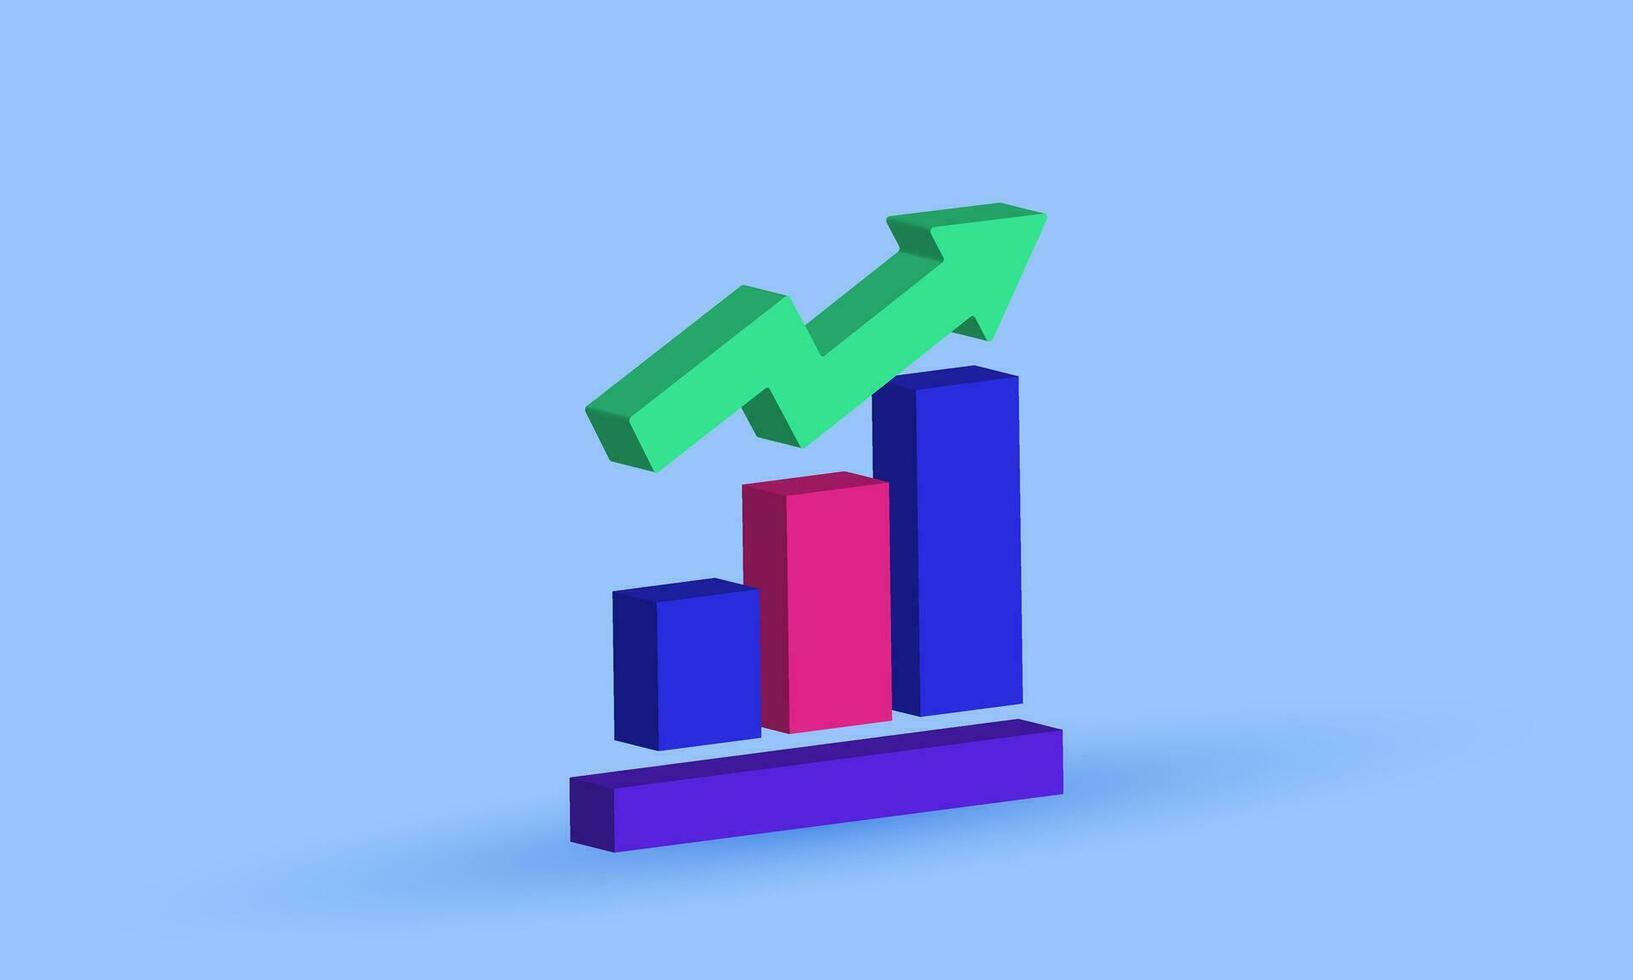 unique 3d style bar chart graph business growth icon trendy symbols isolated on background vector